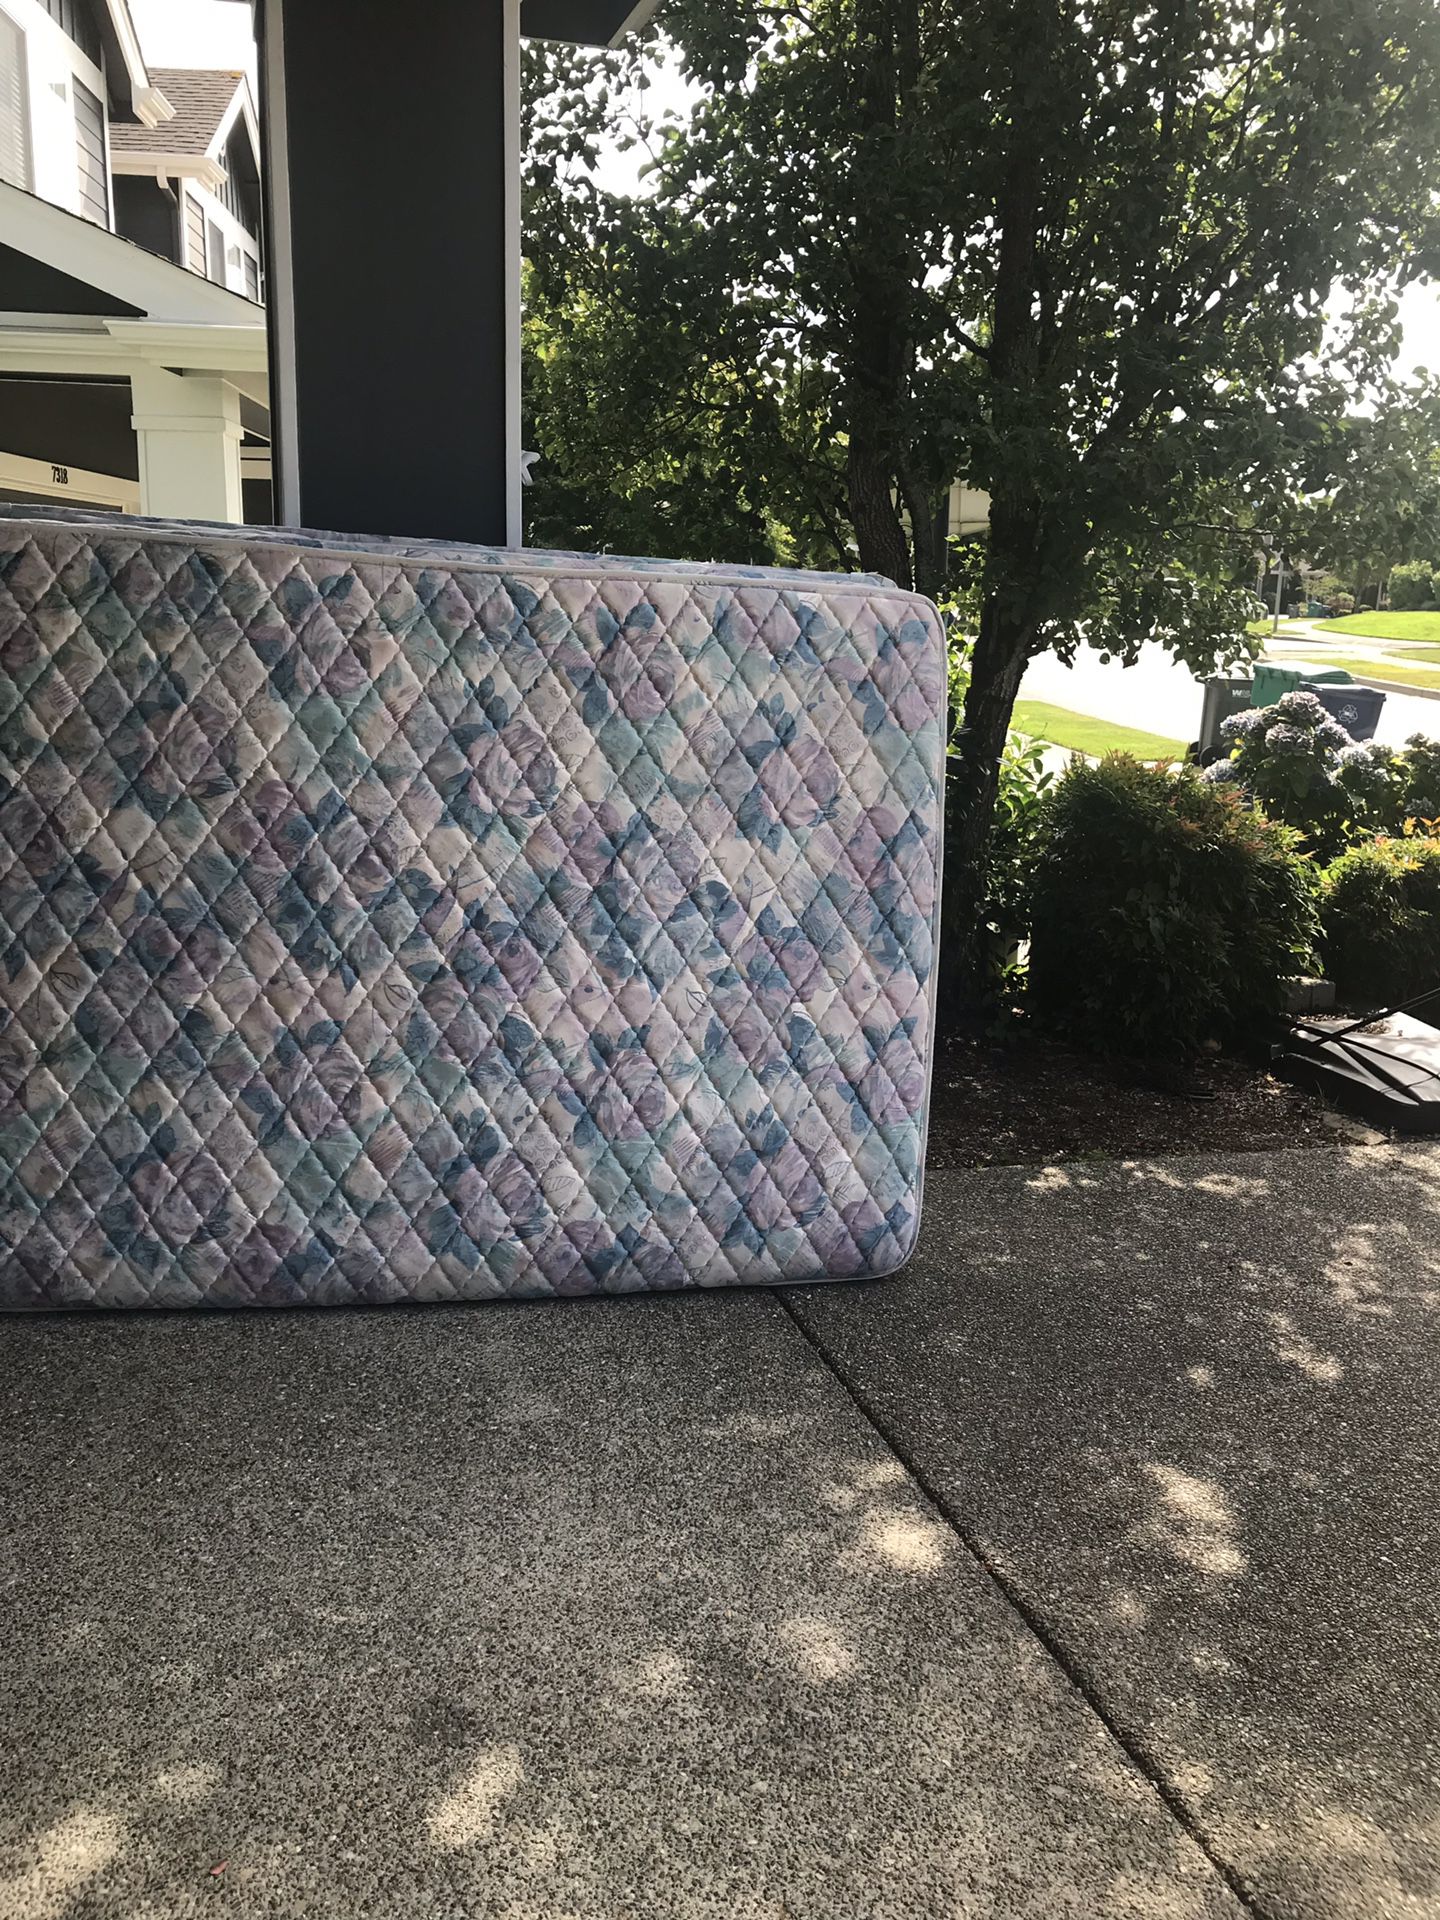 Seally queen size box spring and mattress. Still available